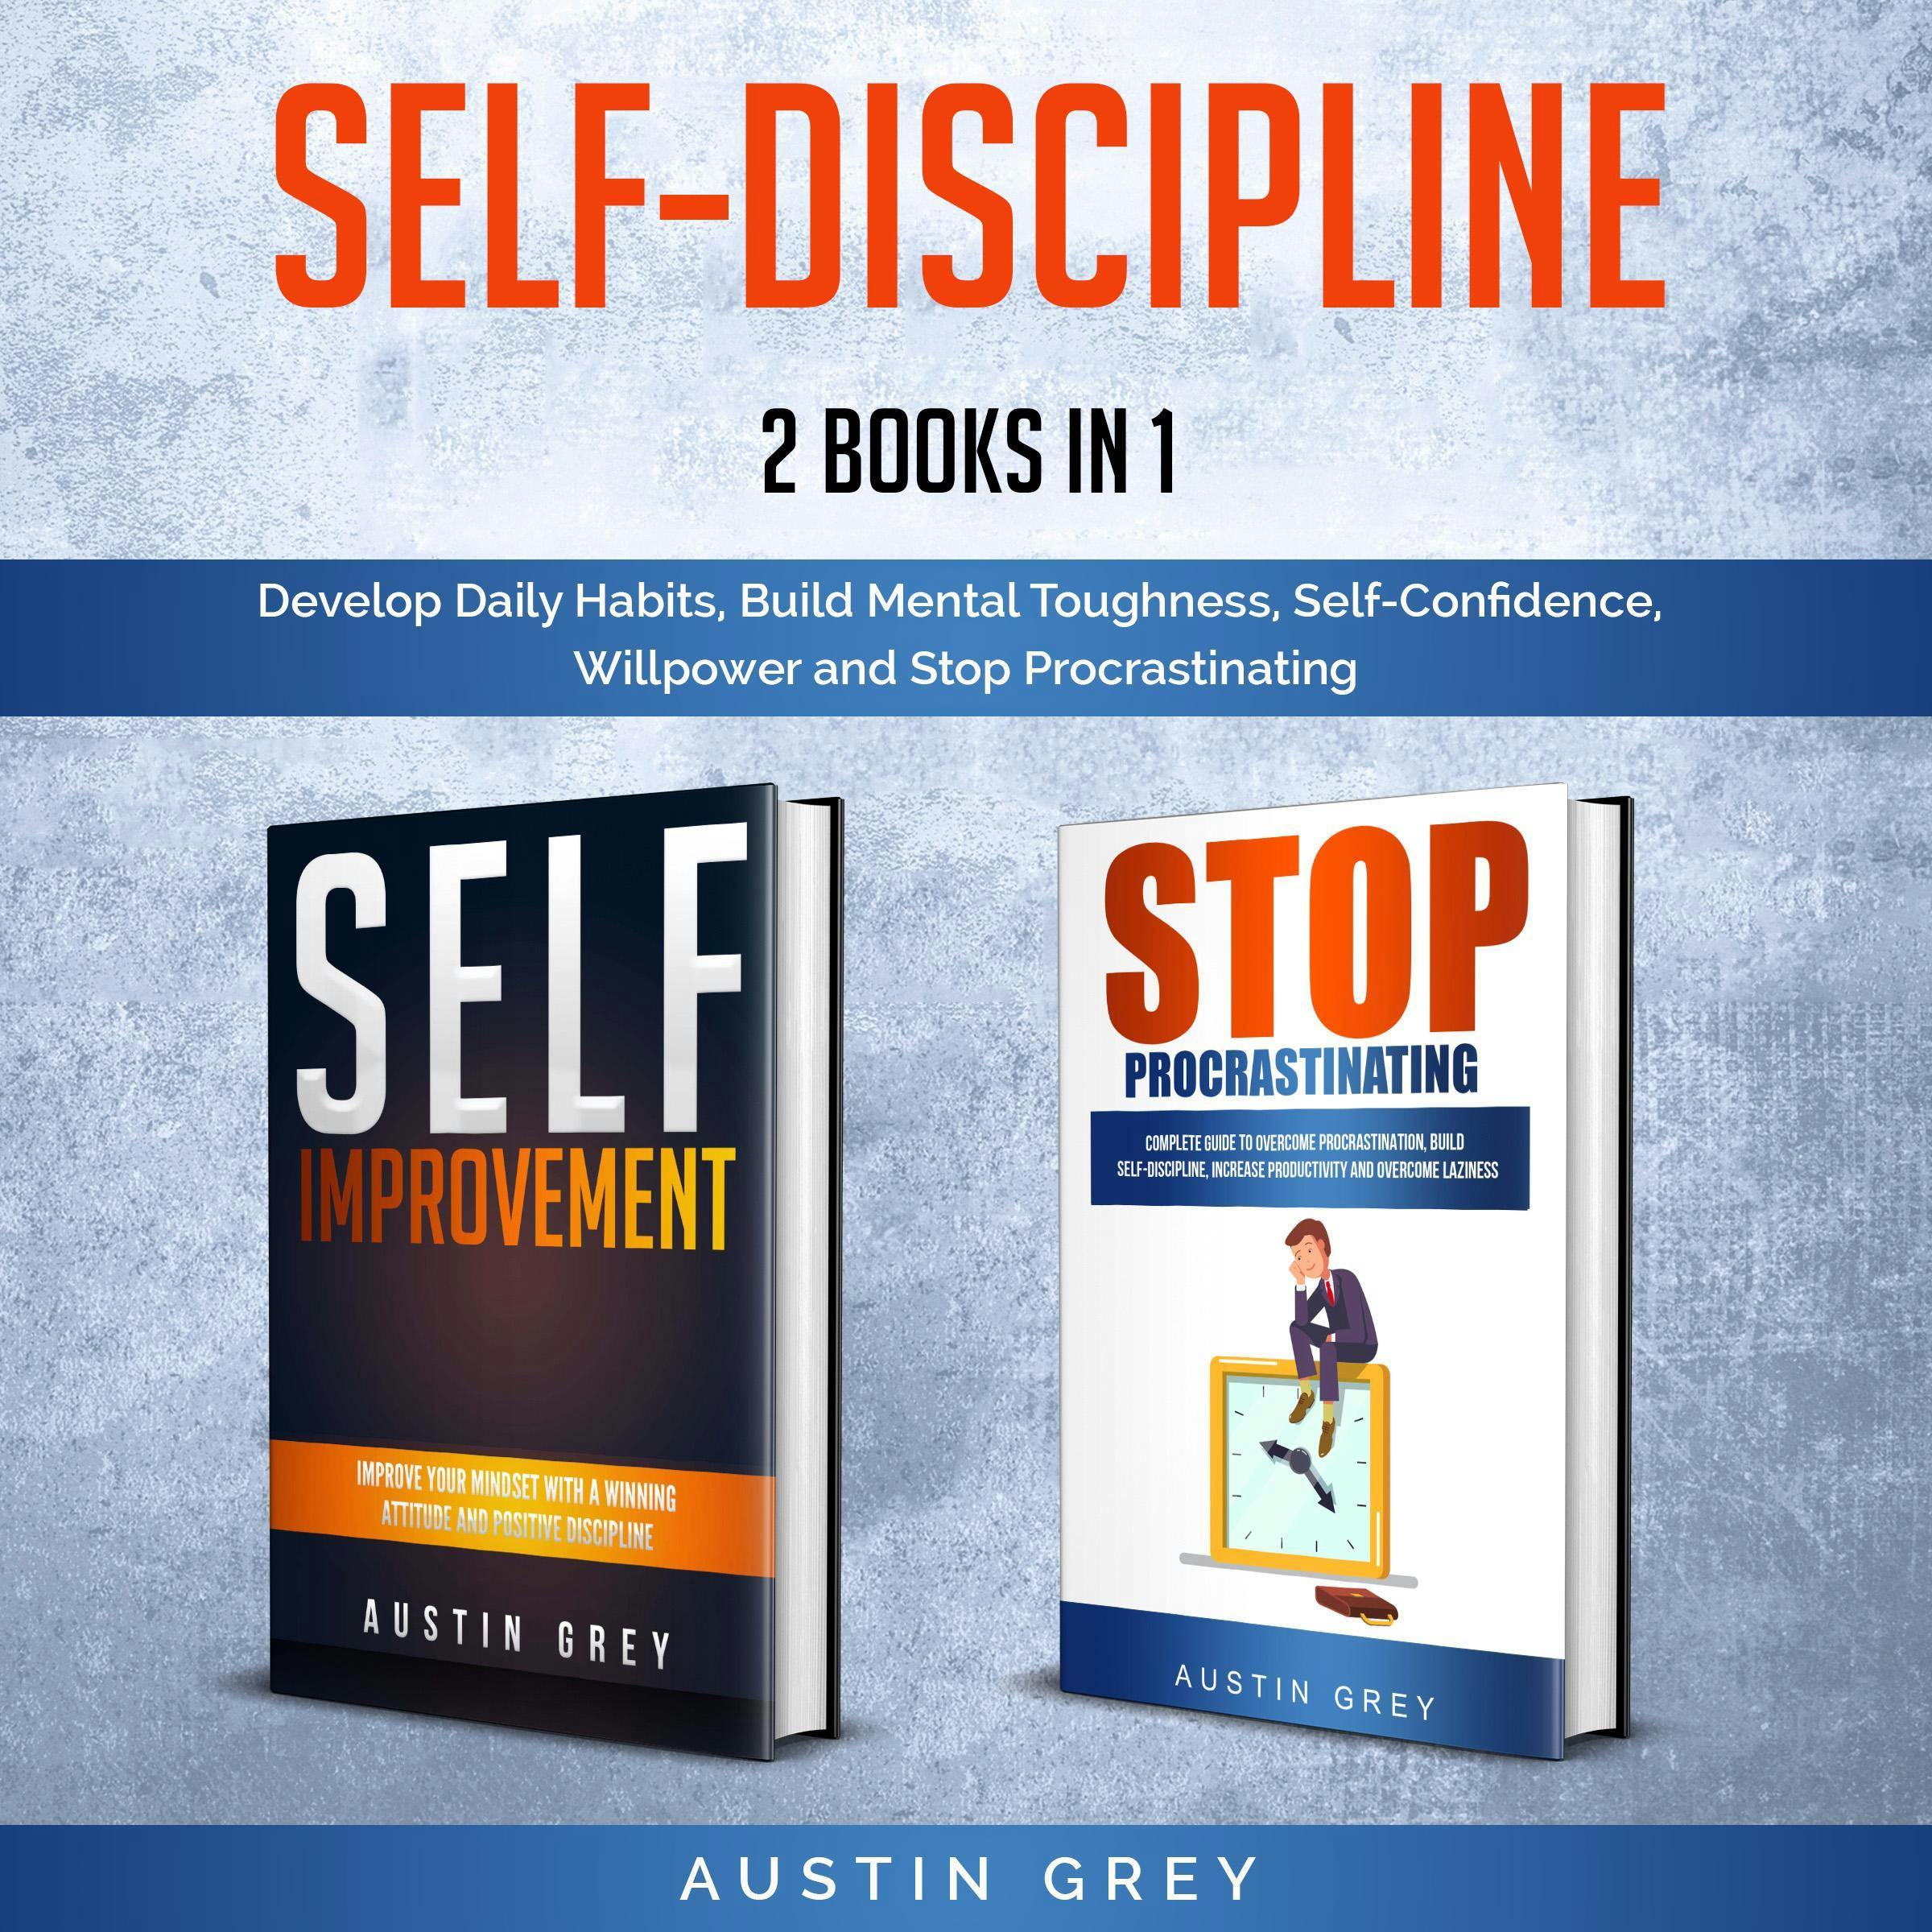 Self-Discipline, 2 Books in 1: Develop Daily Habits, Build Mental Toughness, Self-Confidence, Willpower and Stop Procrastinating - Austin Grey